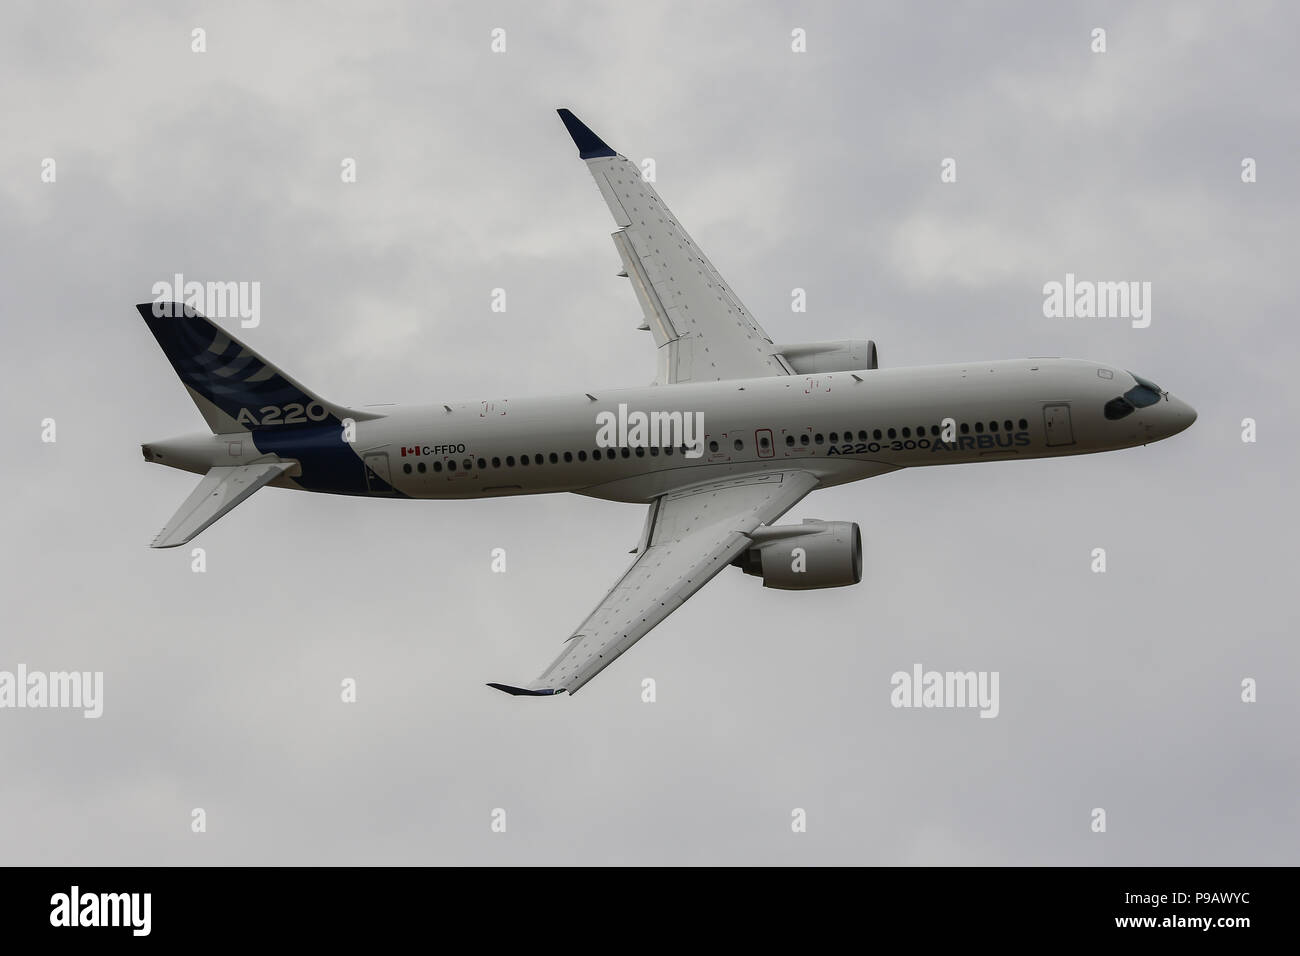 Farnborough, UK. 16th July 2018. An Airbus A220-300 performs in the flying display on the opening day of the 2018 Farnborough International Airshow, one of the biggest aviation trade and industry events in the world, held in the UK. Credit: James Hancock/Alamy Live News Stock Photo